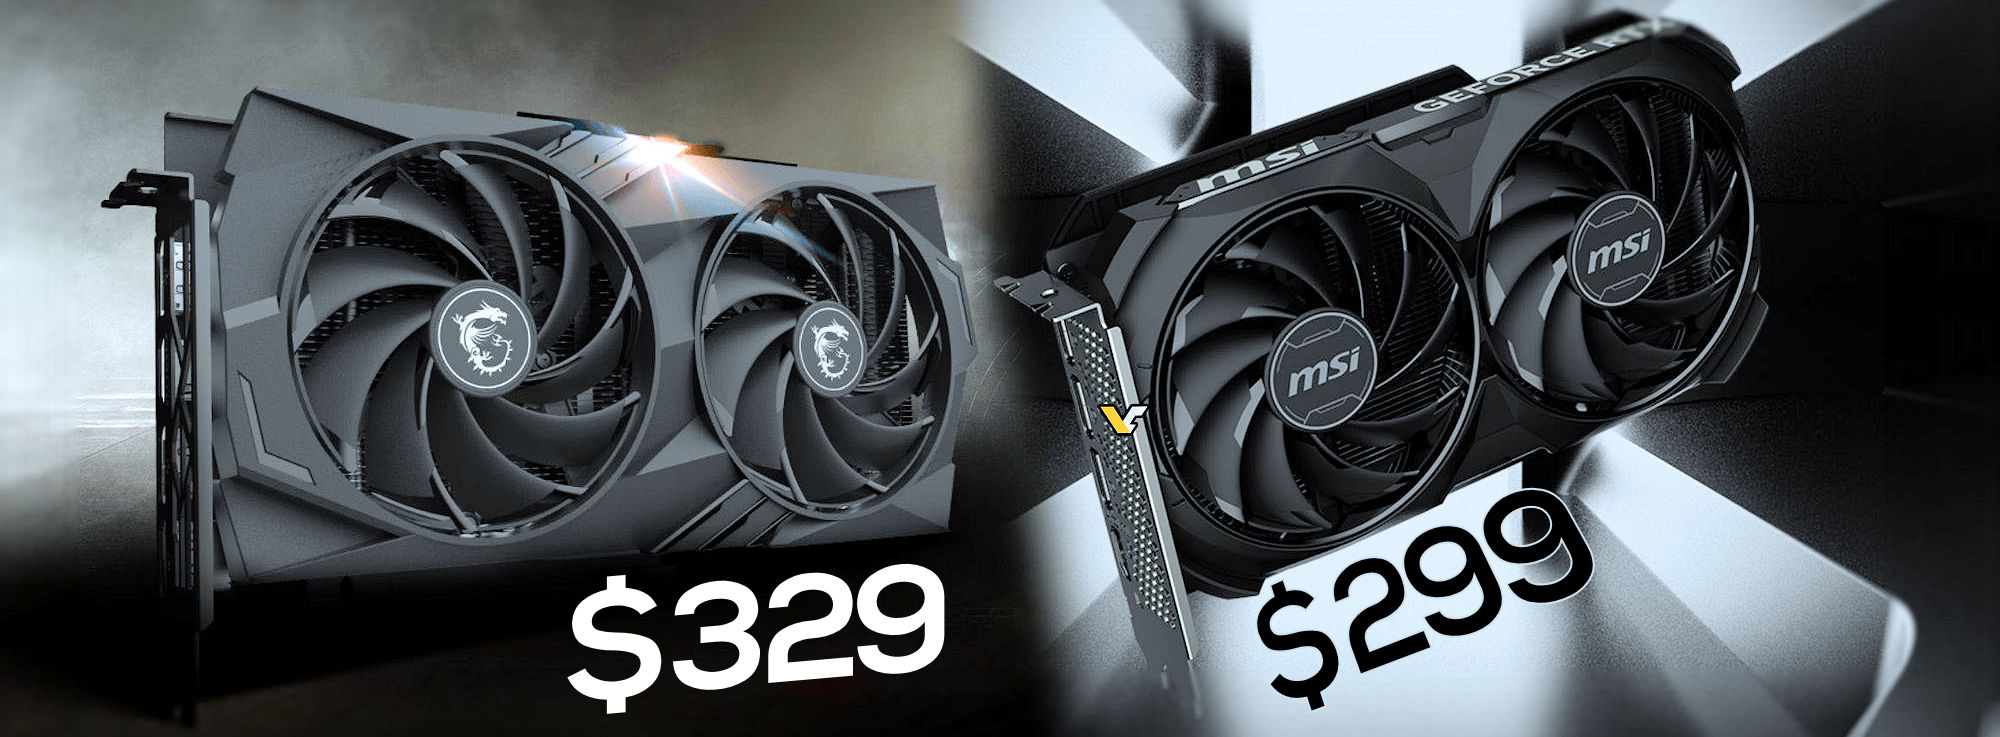 MSI GeForce RTX 4060 series listed for up to $329, a $50 gap between ...